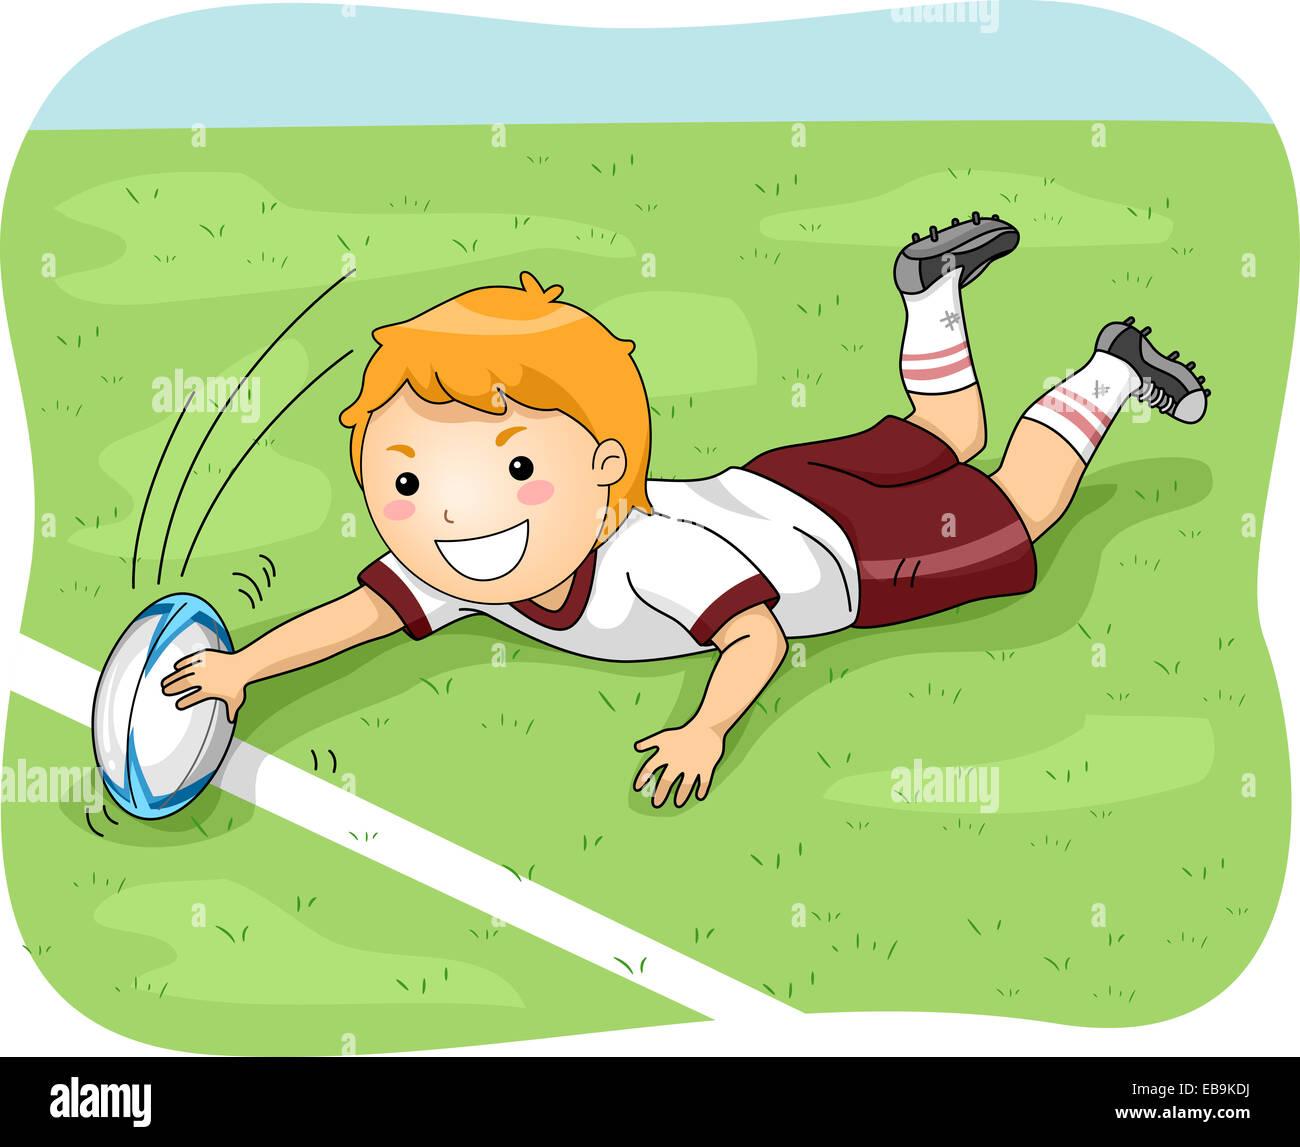 Illustration of a Male Rugby Player Scoring a Goal Stock Photo